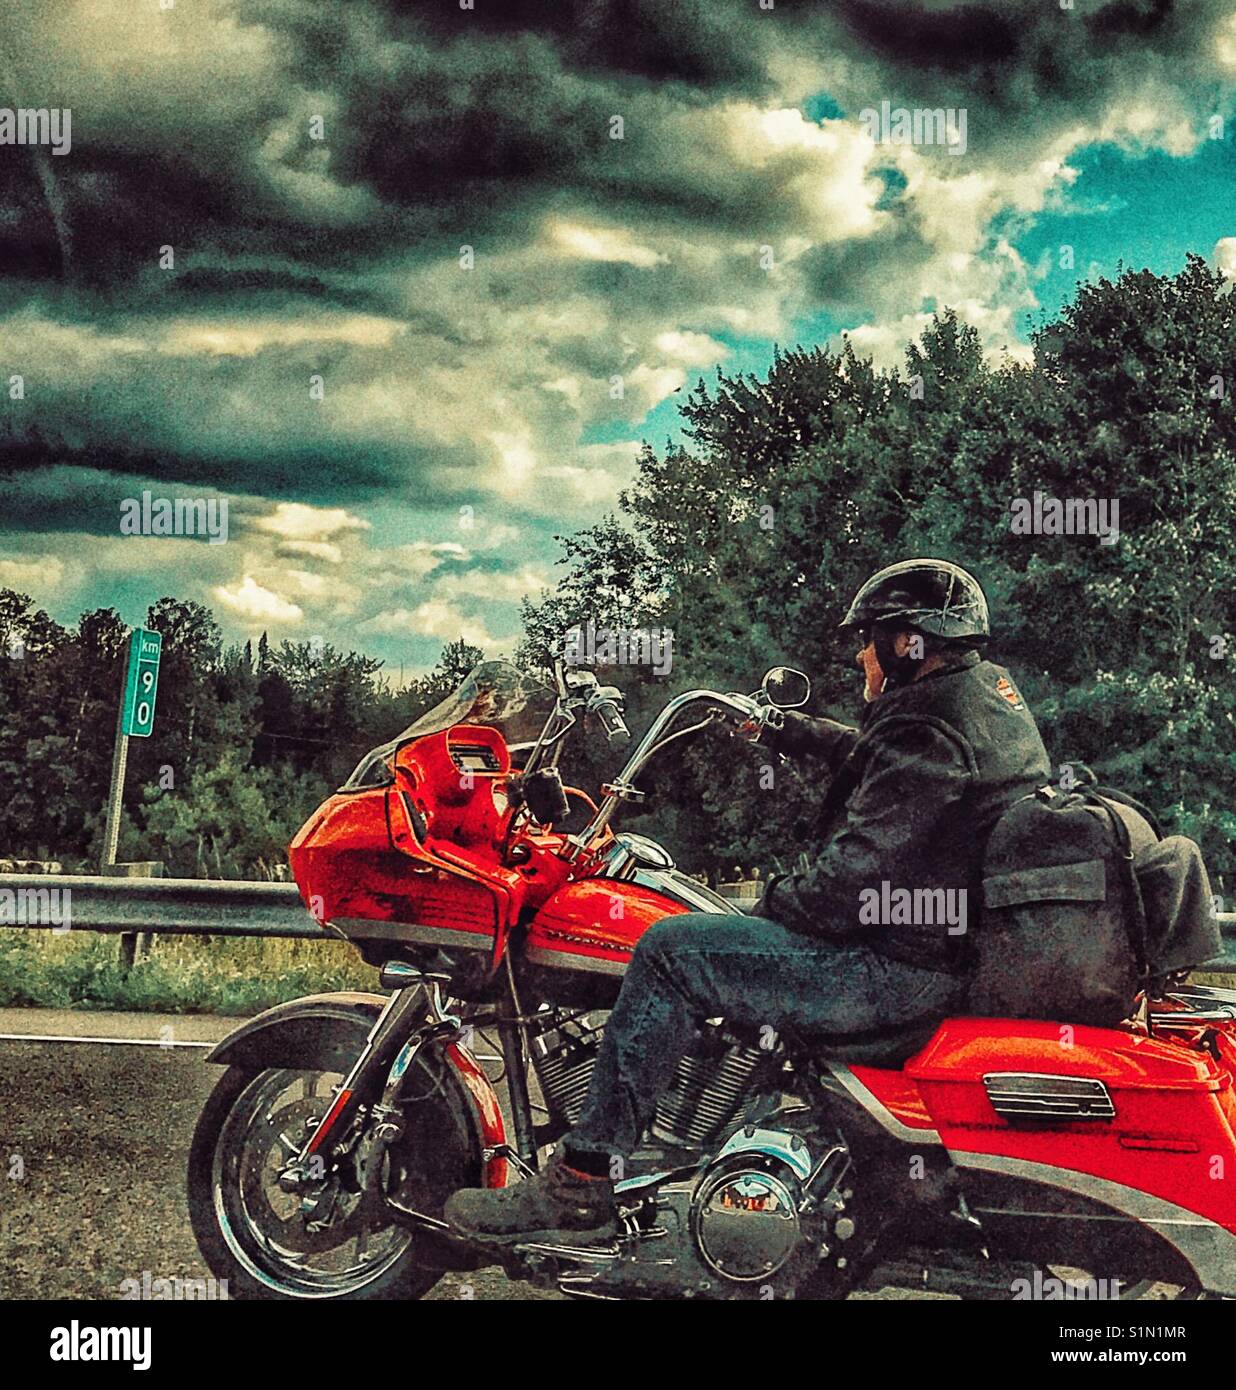 Motorcyclist on the highway. Stock Photo